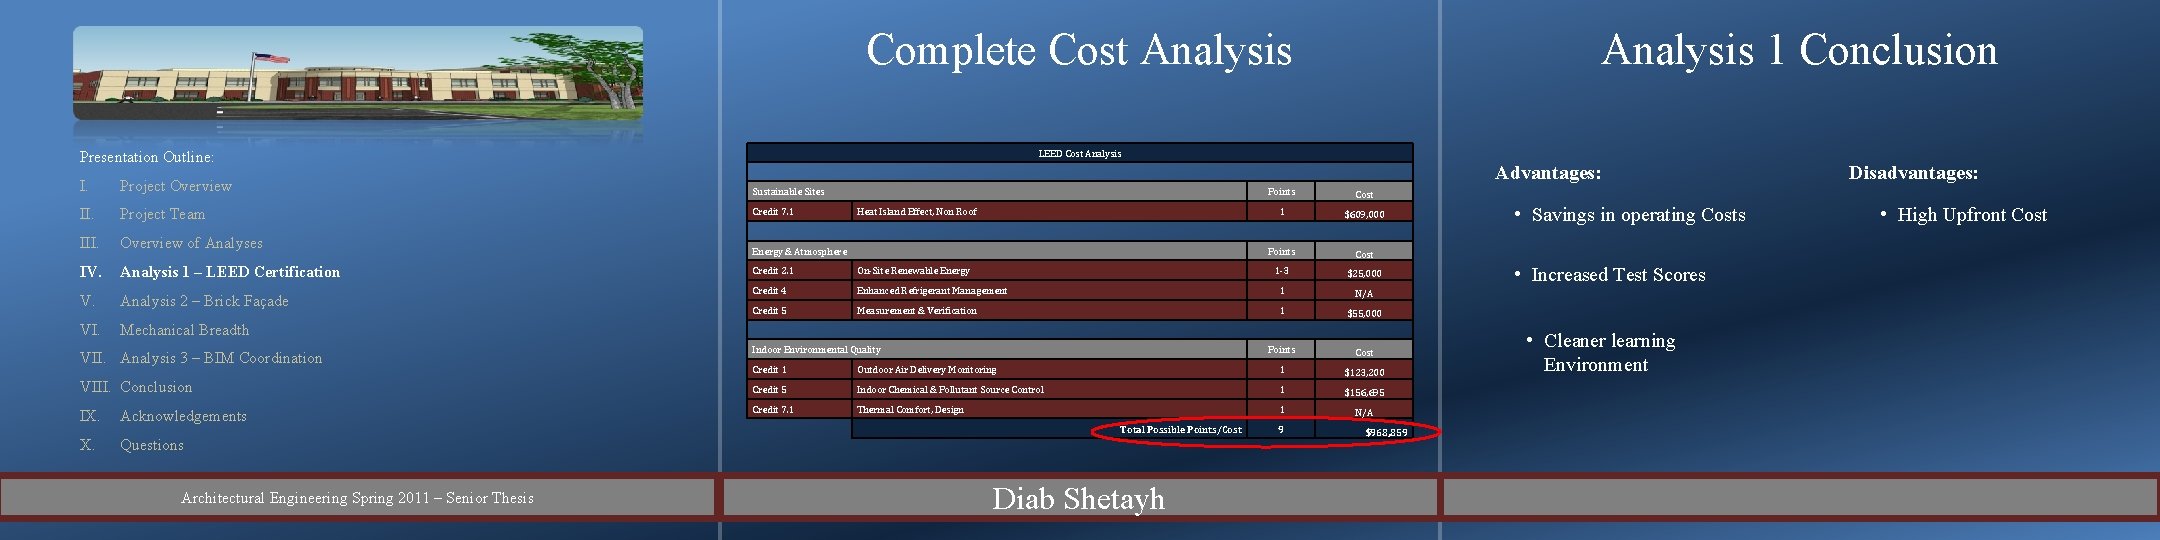 Complete Cost Analysis LEED Cost Analysis Presentation Outline: I. Project Overview II. Project Team